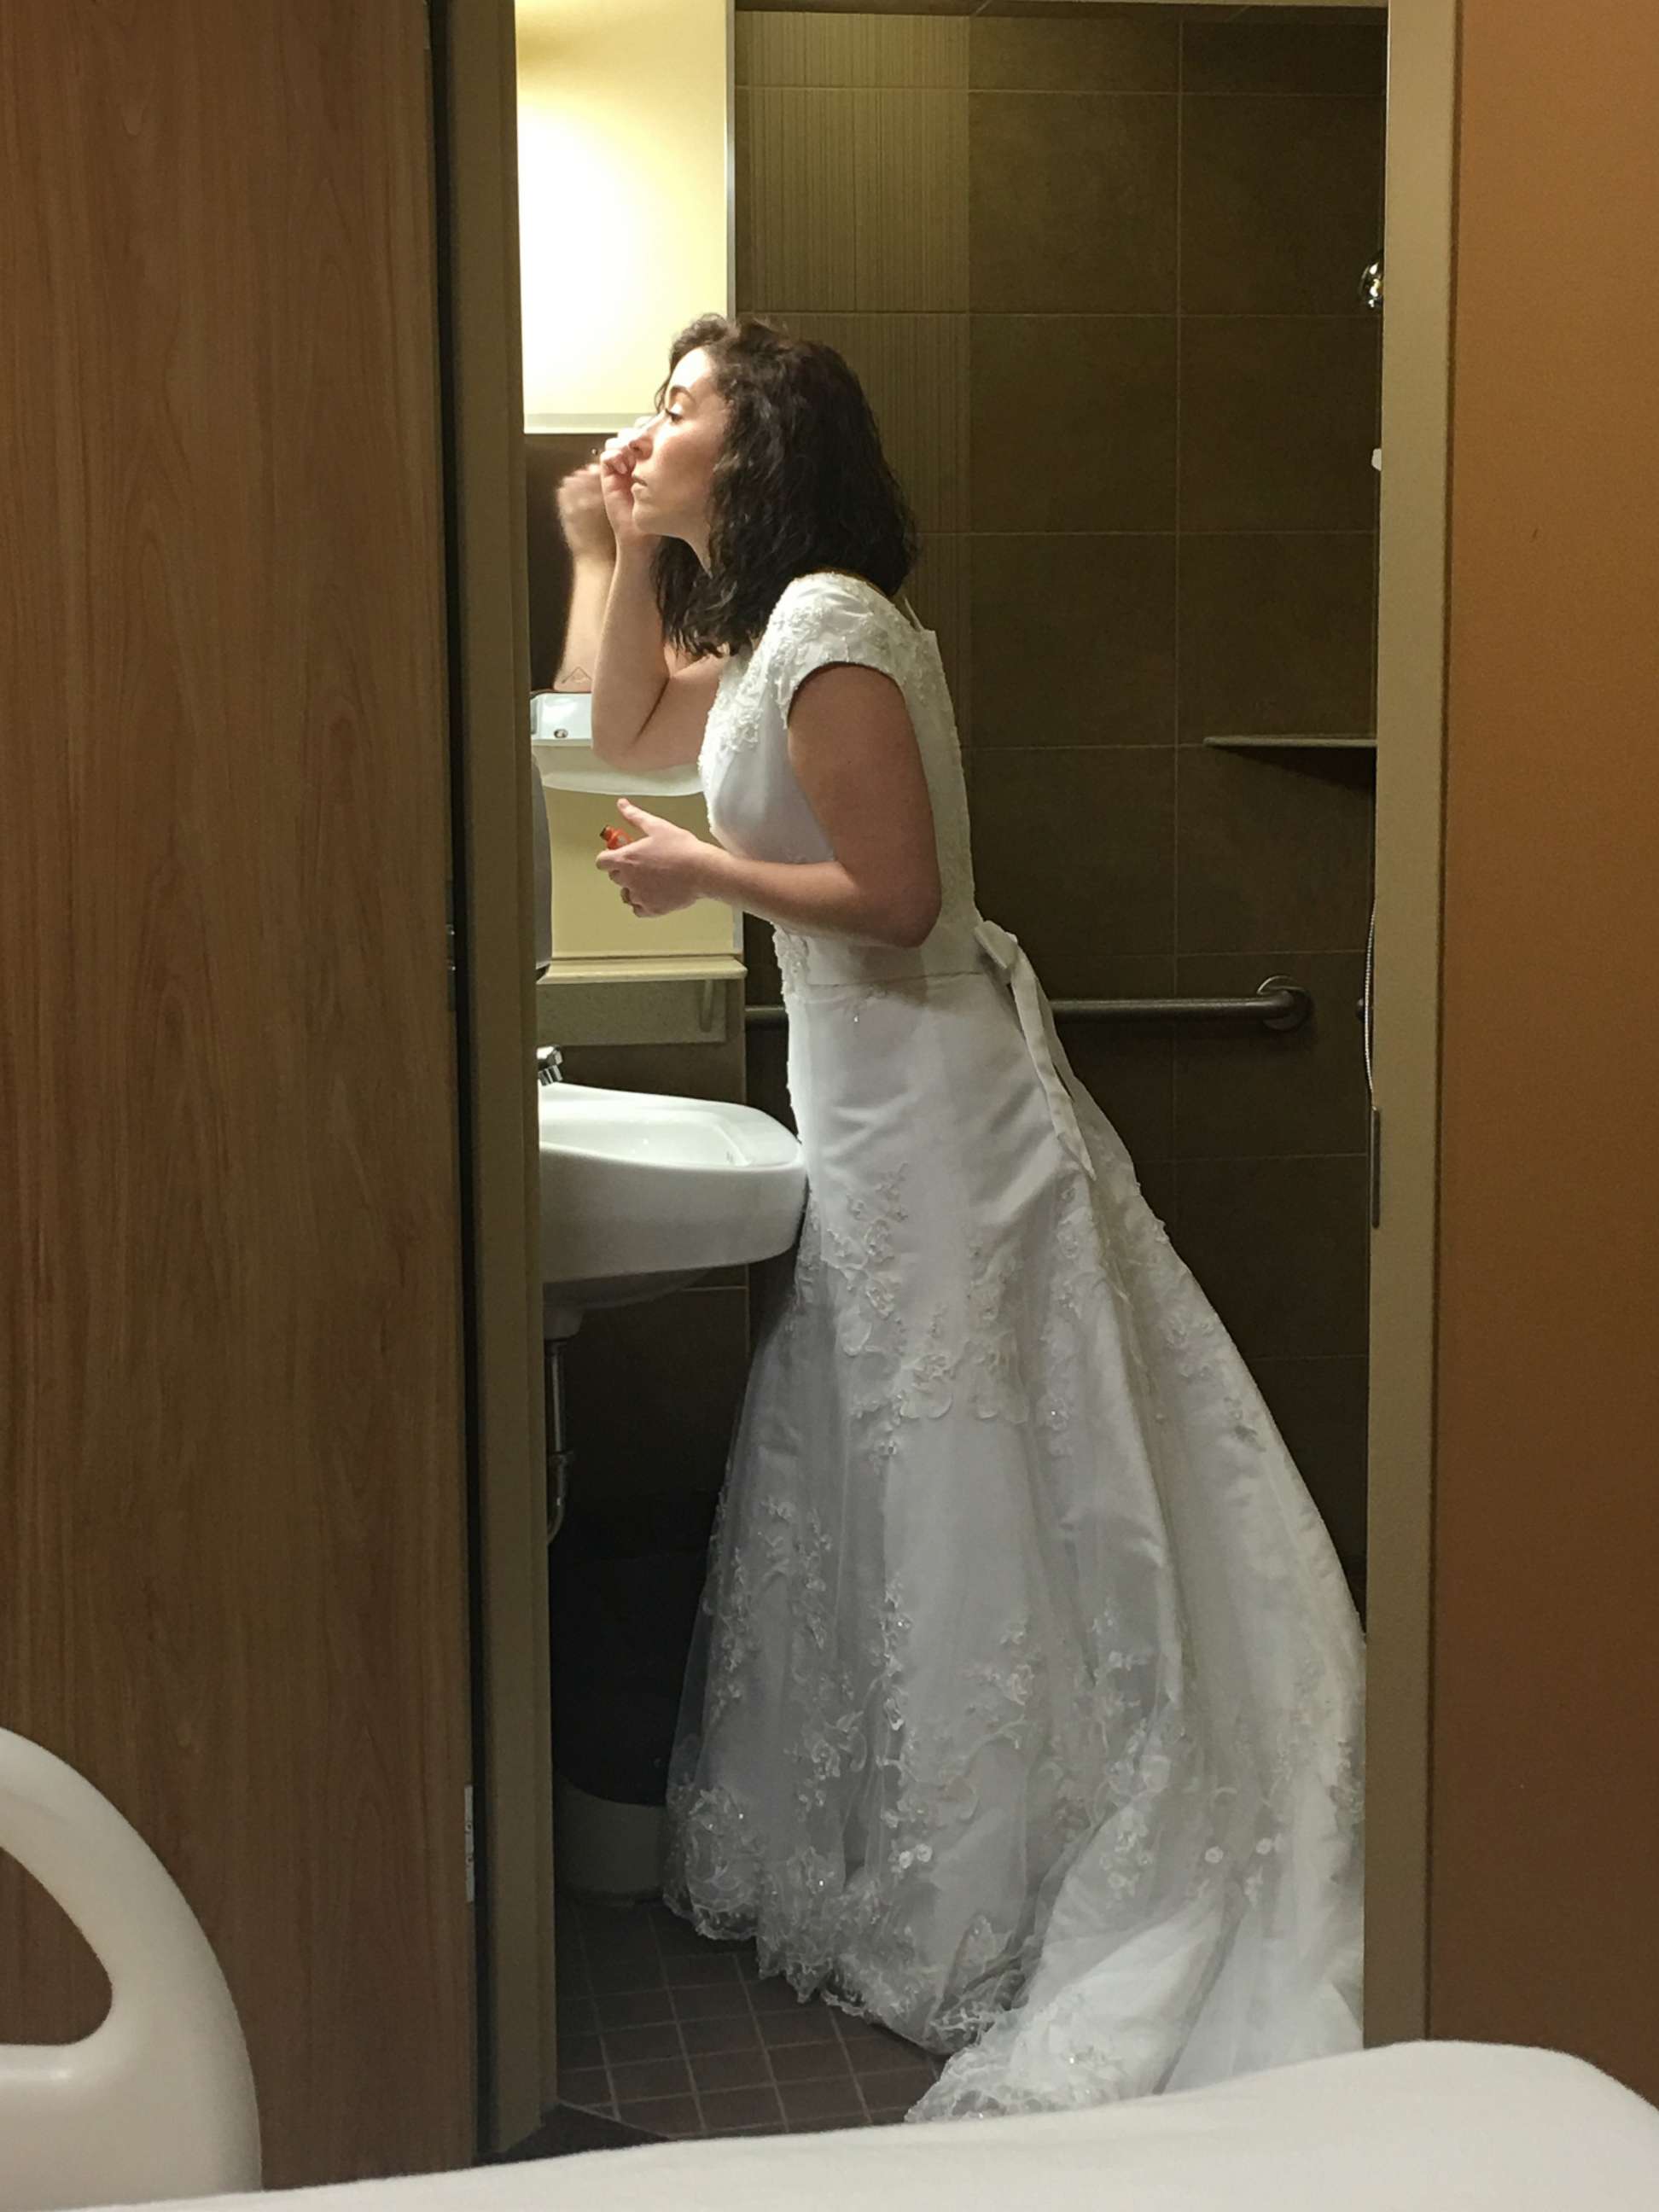 PHOTO: Whitney Romans gets ready for her wedding at St. Luke's Magic Valley Medical Center in Twin Falls, Idaho.